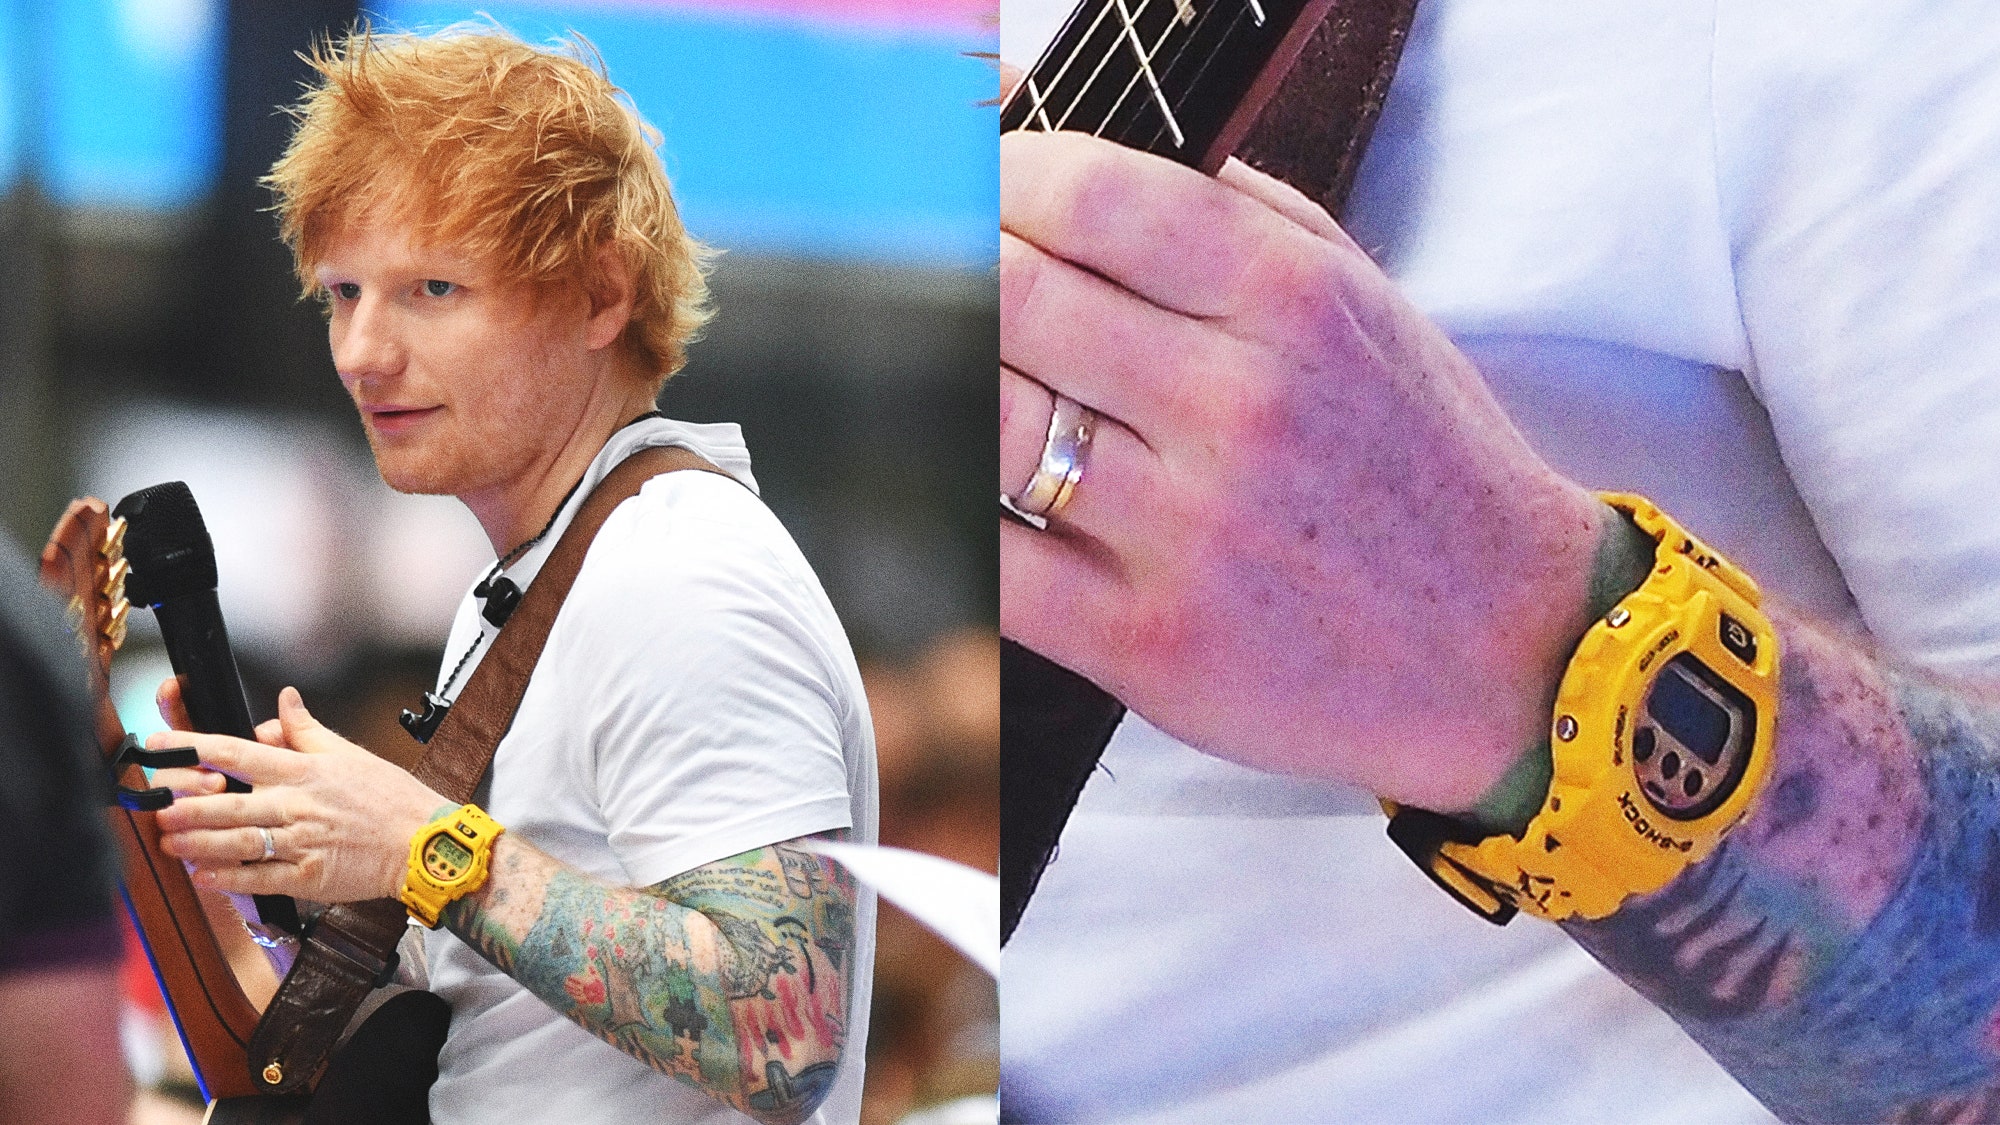 Ed Sheerans Latest Watch Wont Set You Back More Than 100